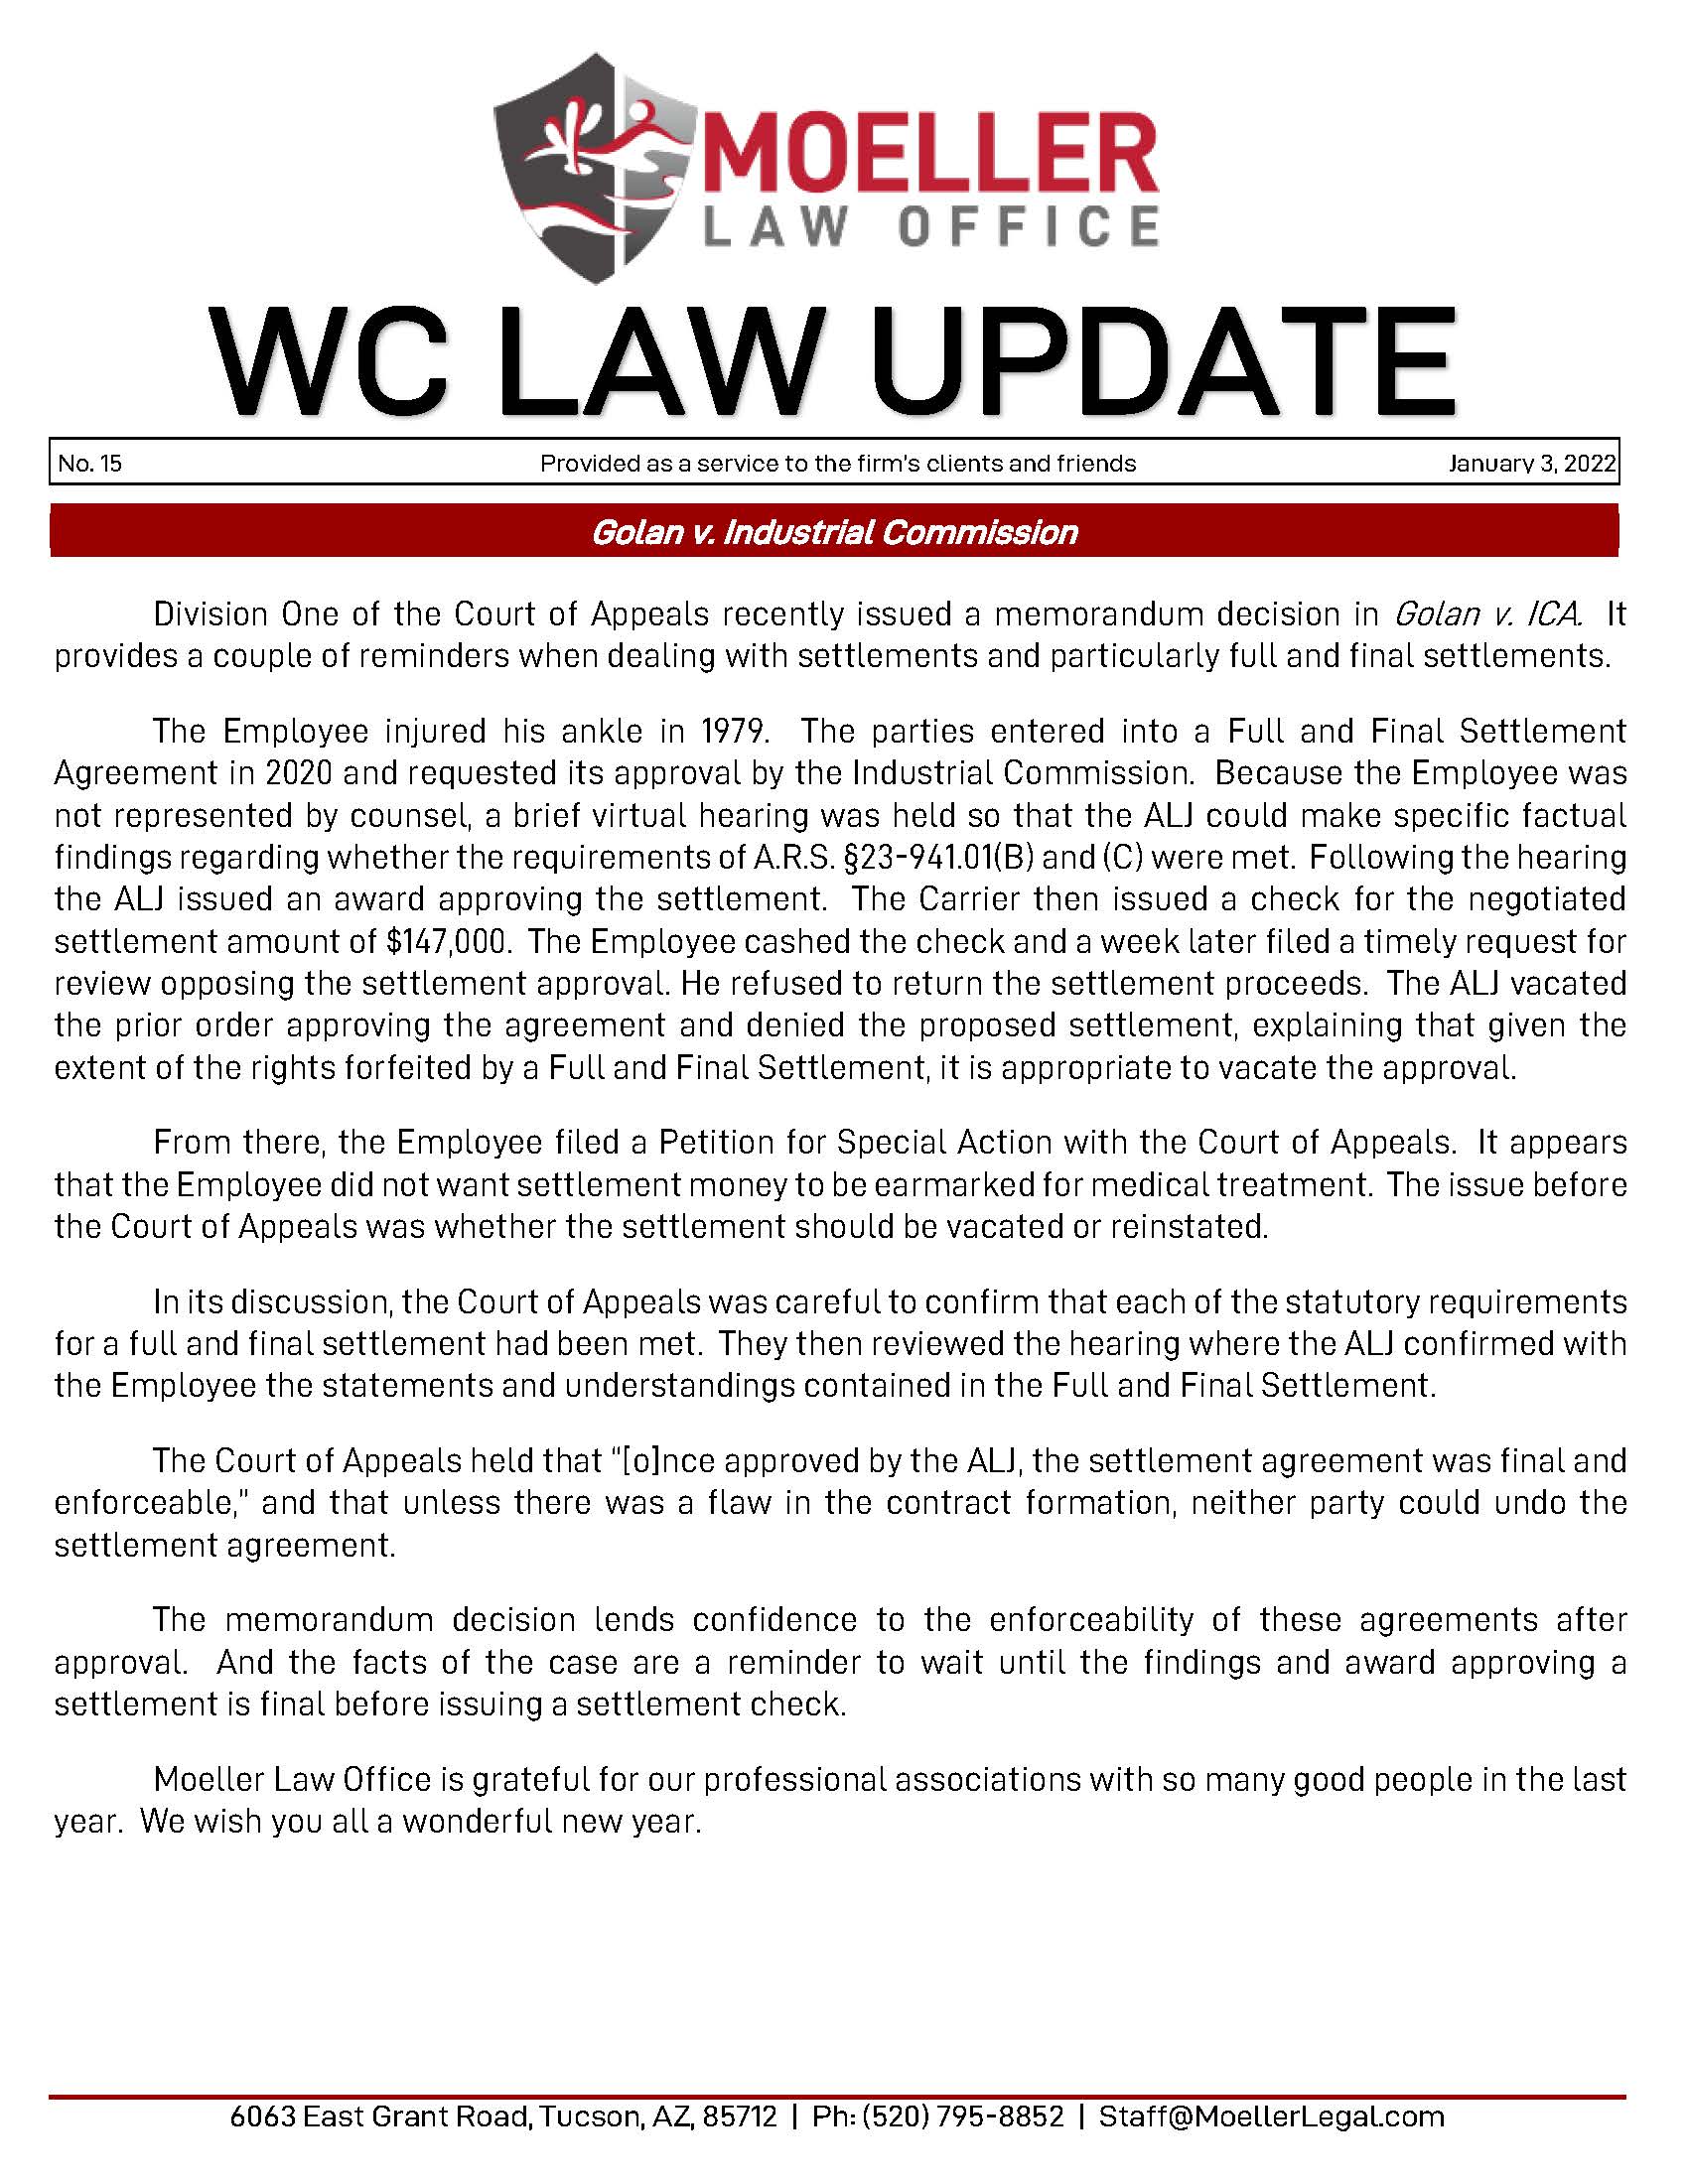 No. 15 - WC Law Update - Golan v. Industrial Commission